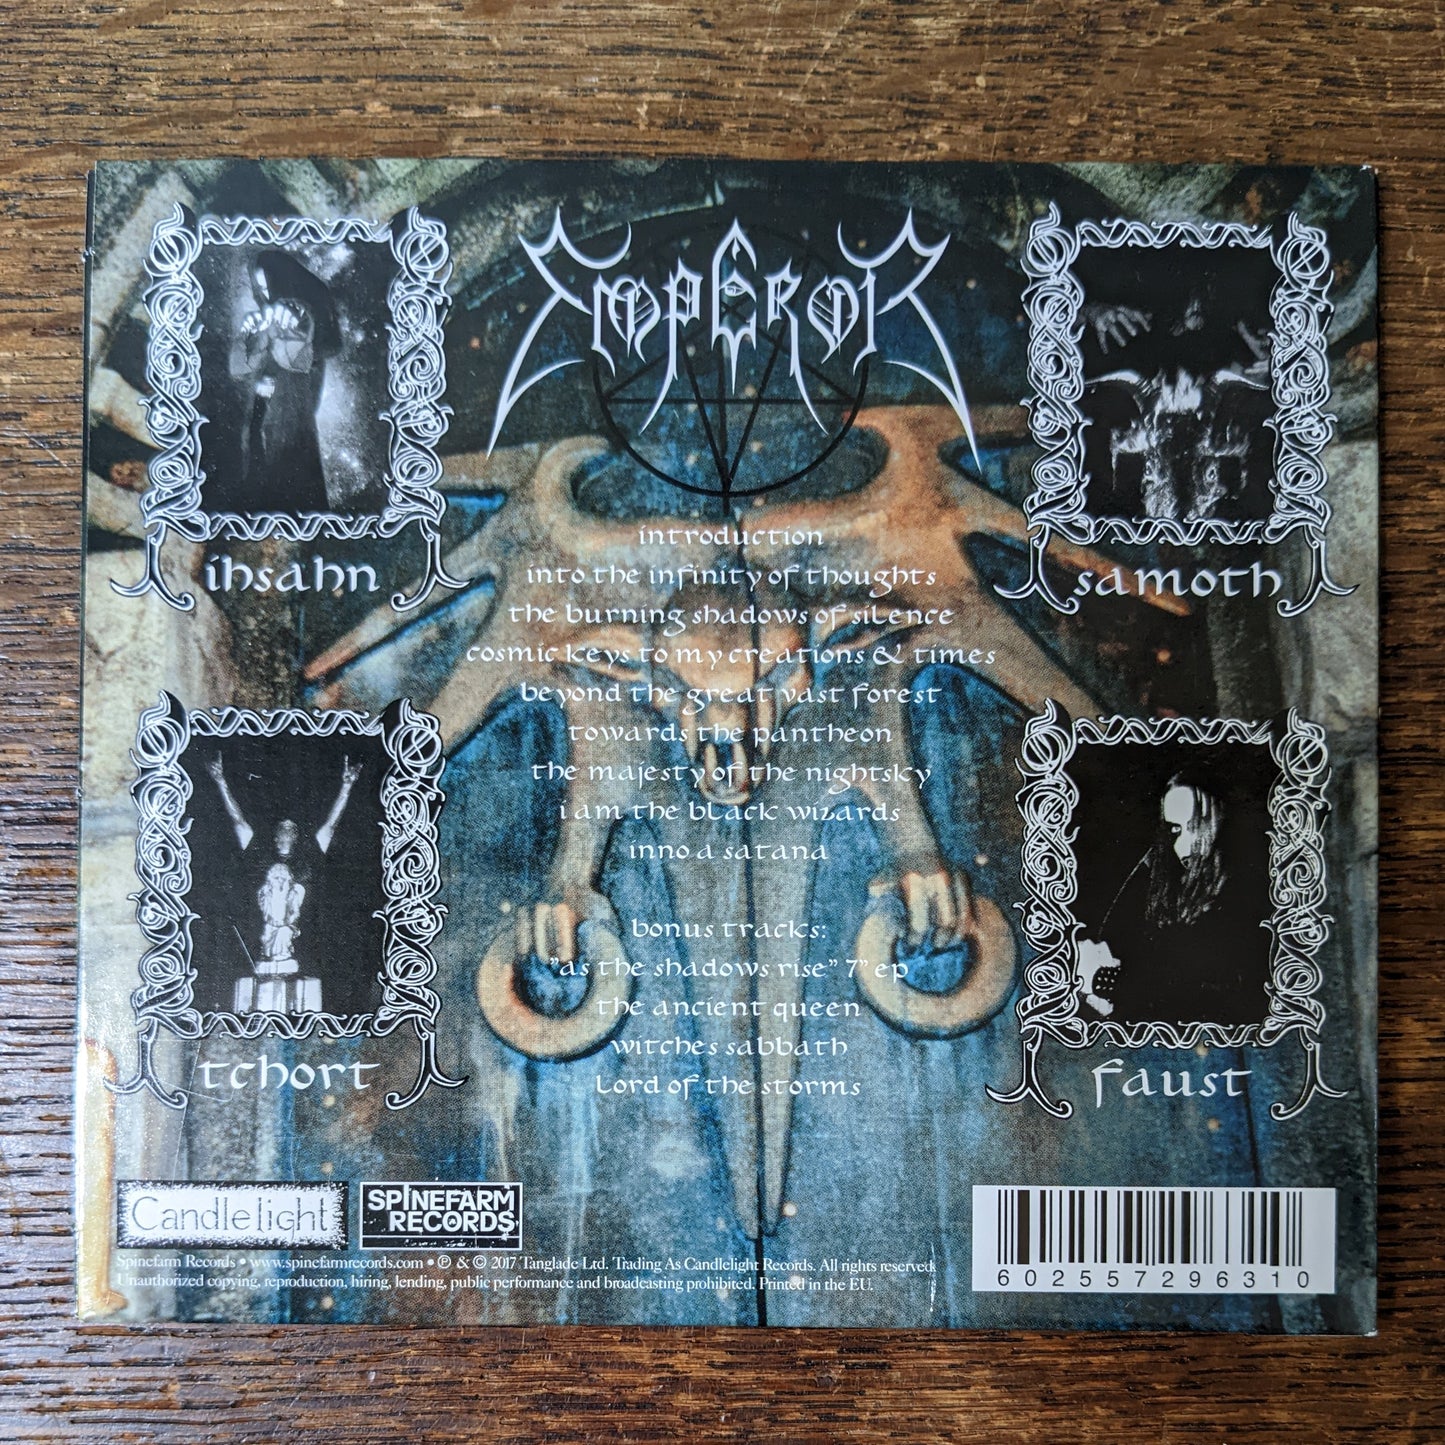 [SOLD OUT] EMPEROR "In the Nightside Eclipse" CD [gatefold digisleeve]